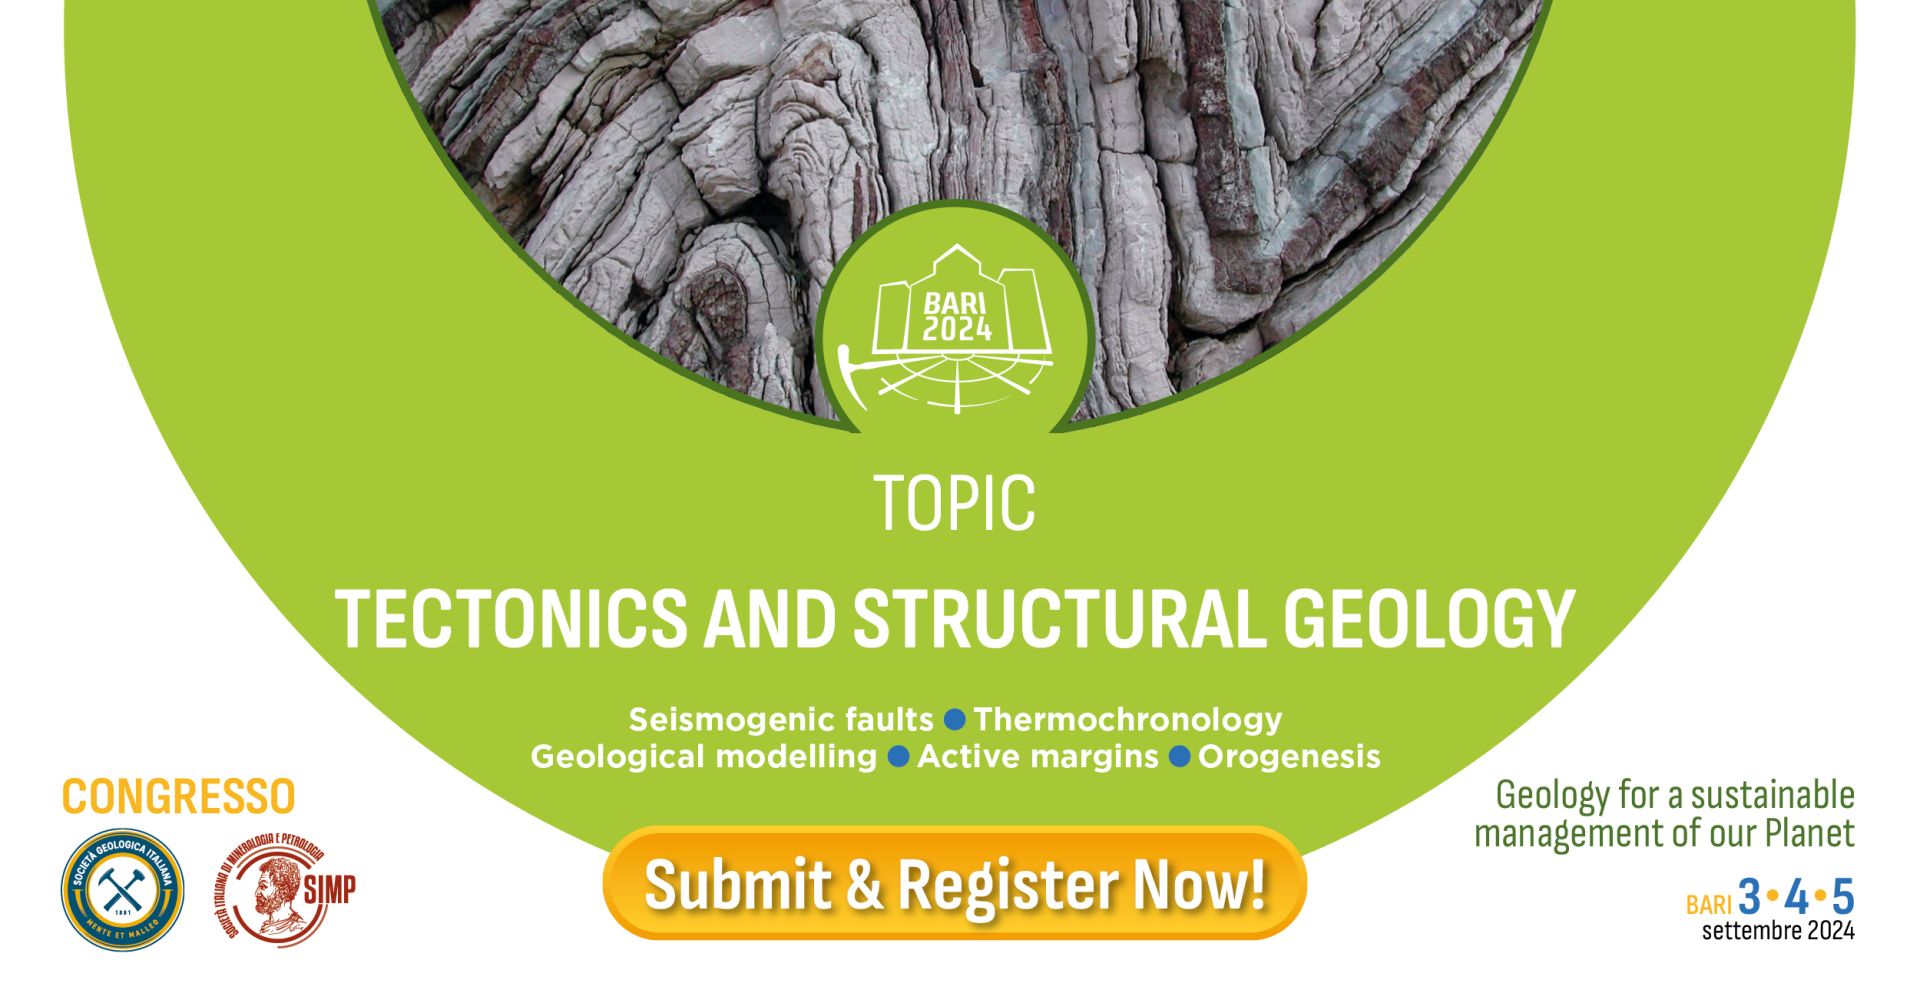 Tectonics and structural geology